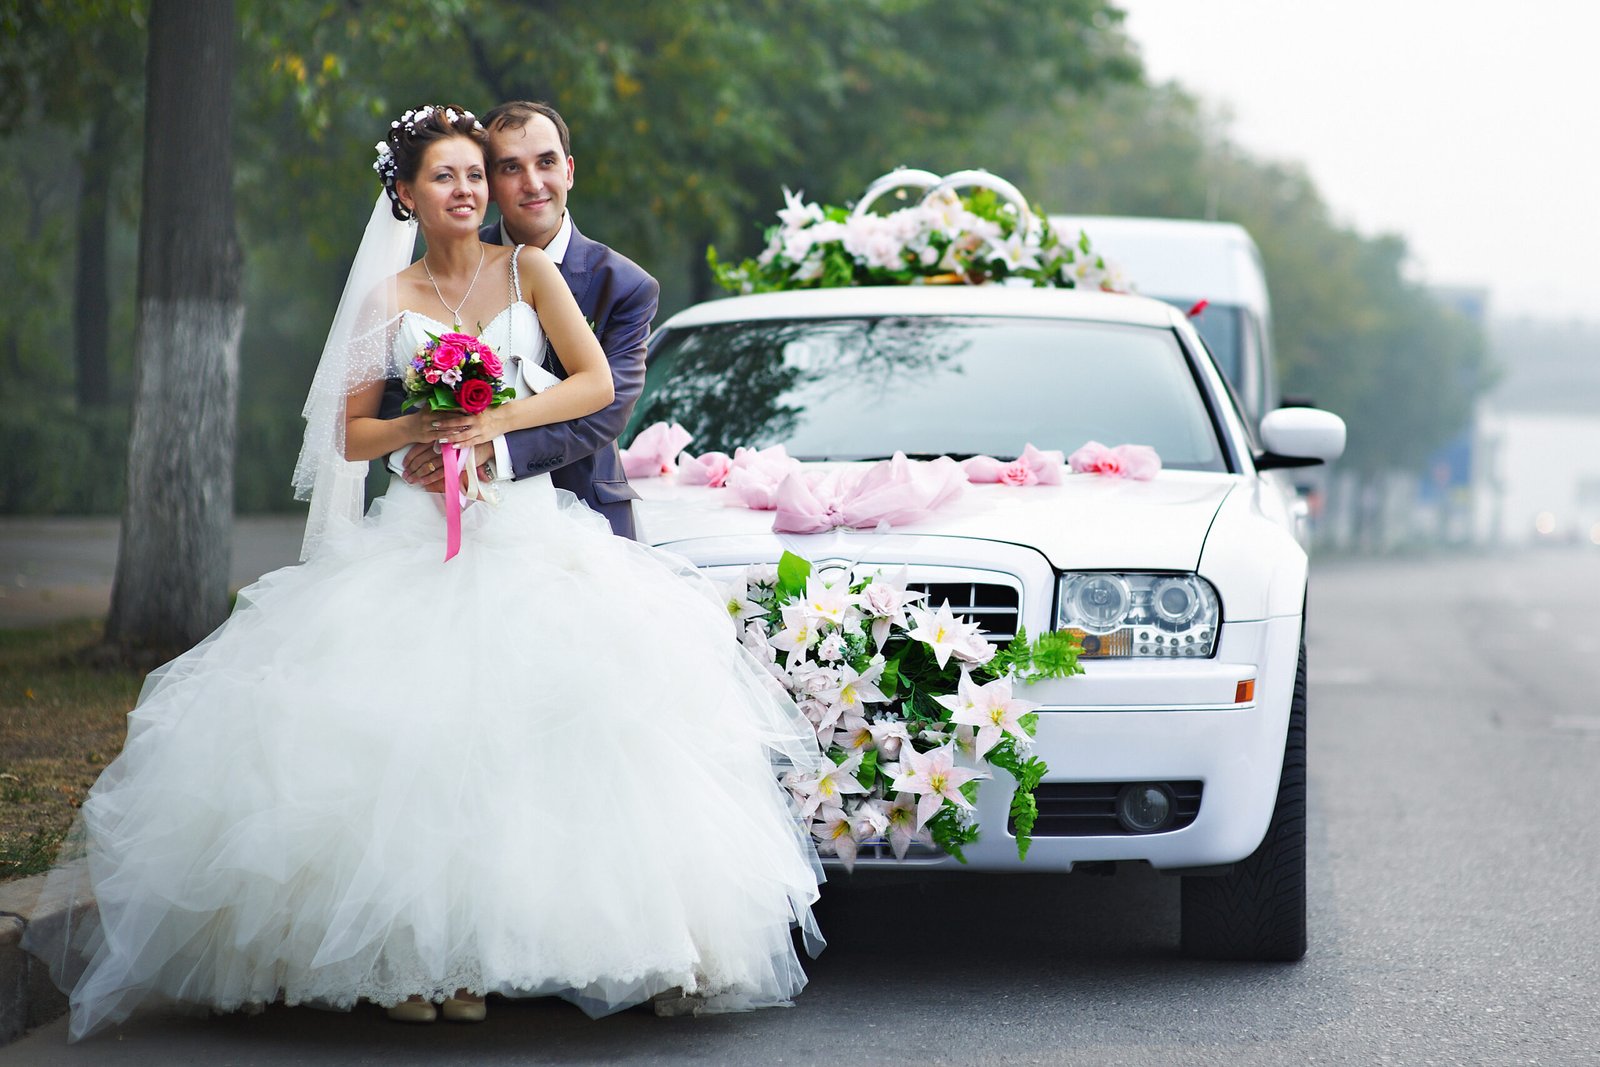 Extra Ordinary And Comfortable Wedding Limo Services in Chicago